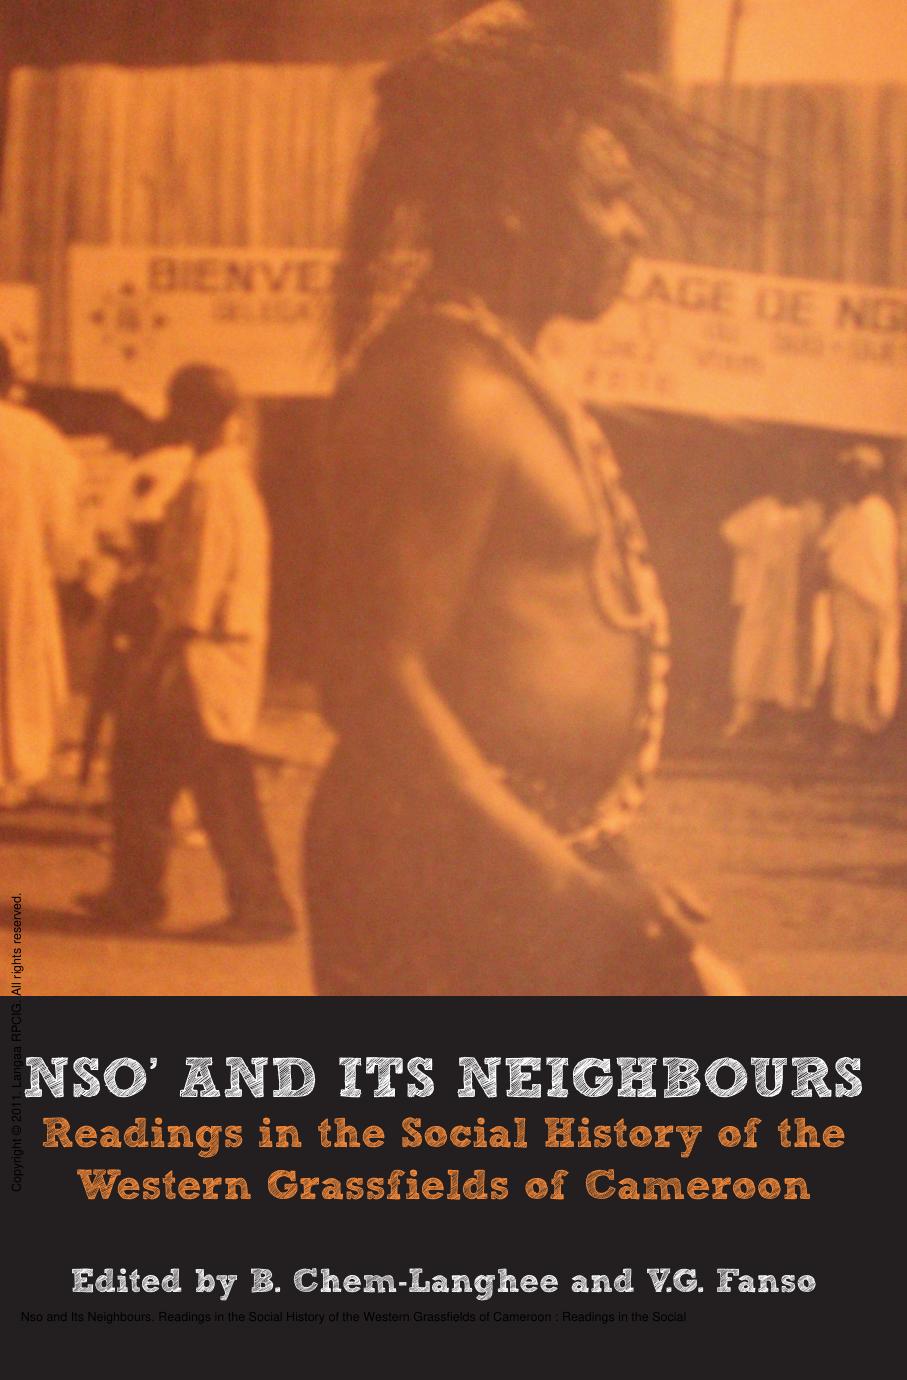 Nso and Its Neighbours. Readings in the Social History of the Western Grassfields of Cameroon : Readings in the Social History of the Western Grassfields of Cameroon by B. Chem-Langhee; V.G. Fanso